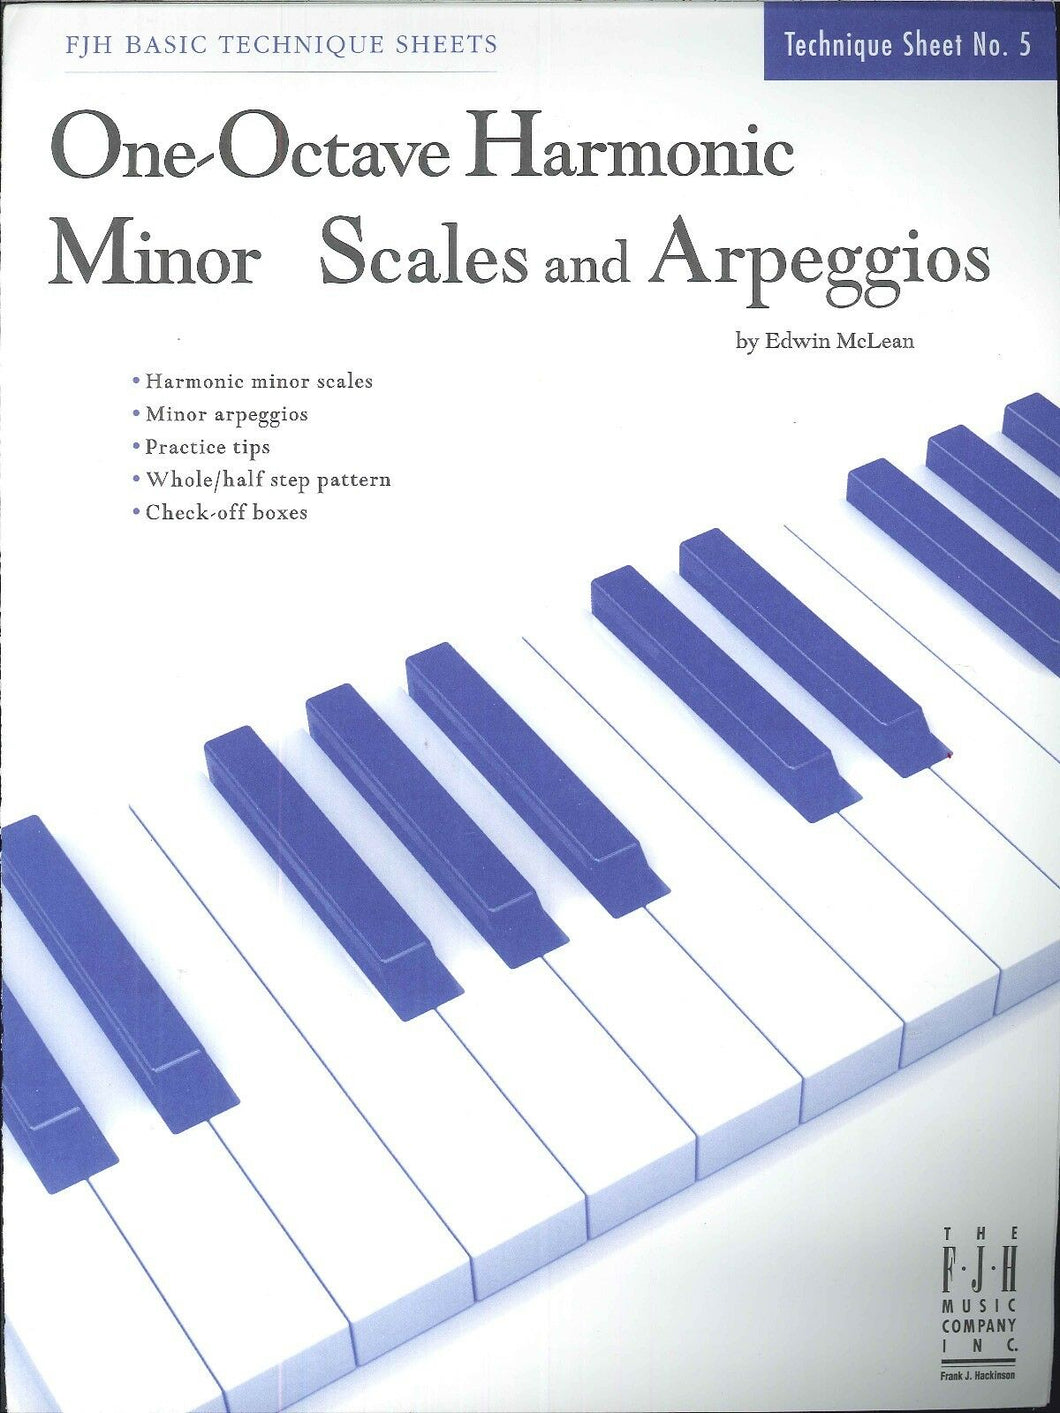 FJH Basic Technique Sheets One Octave Harmonic Minor Scales and Arpeggios